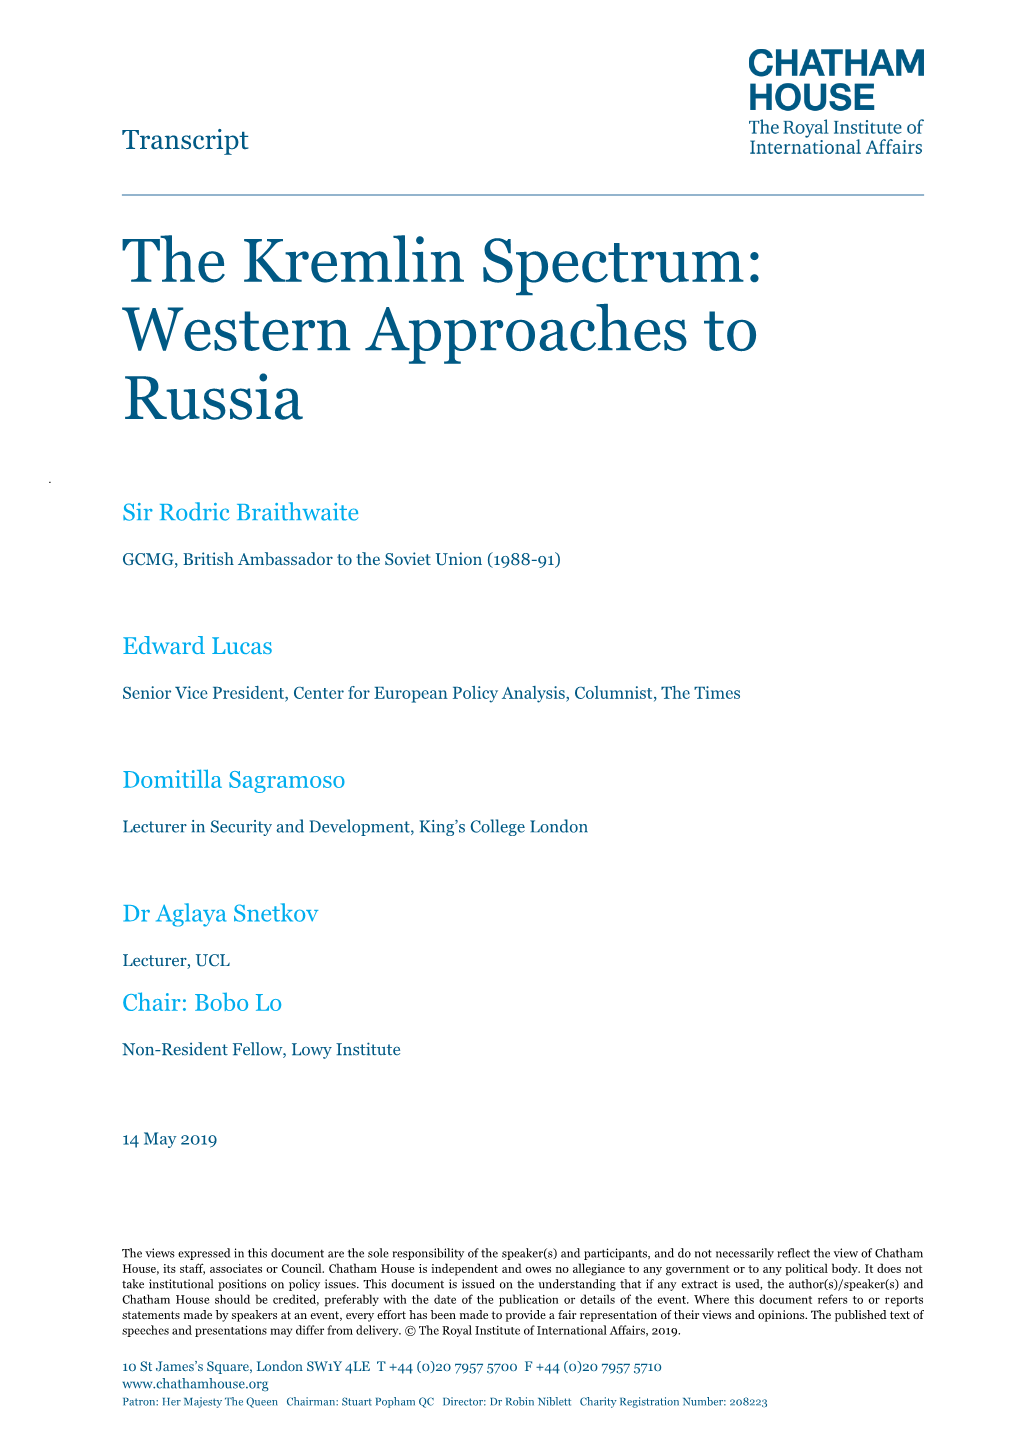 The Kremlin Spectrum: Western Approaches to Russia